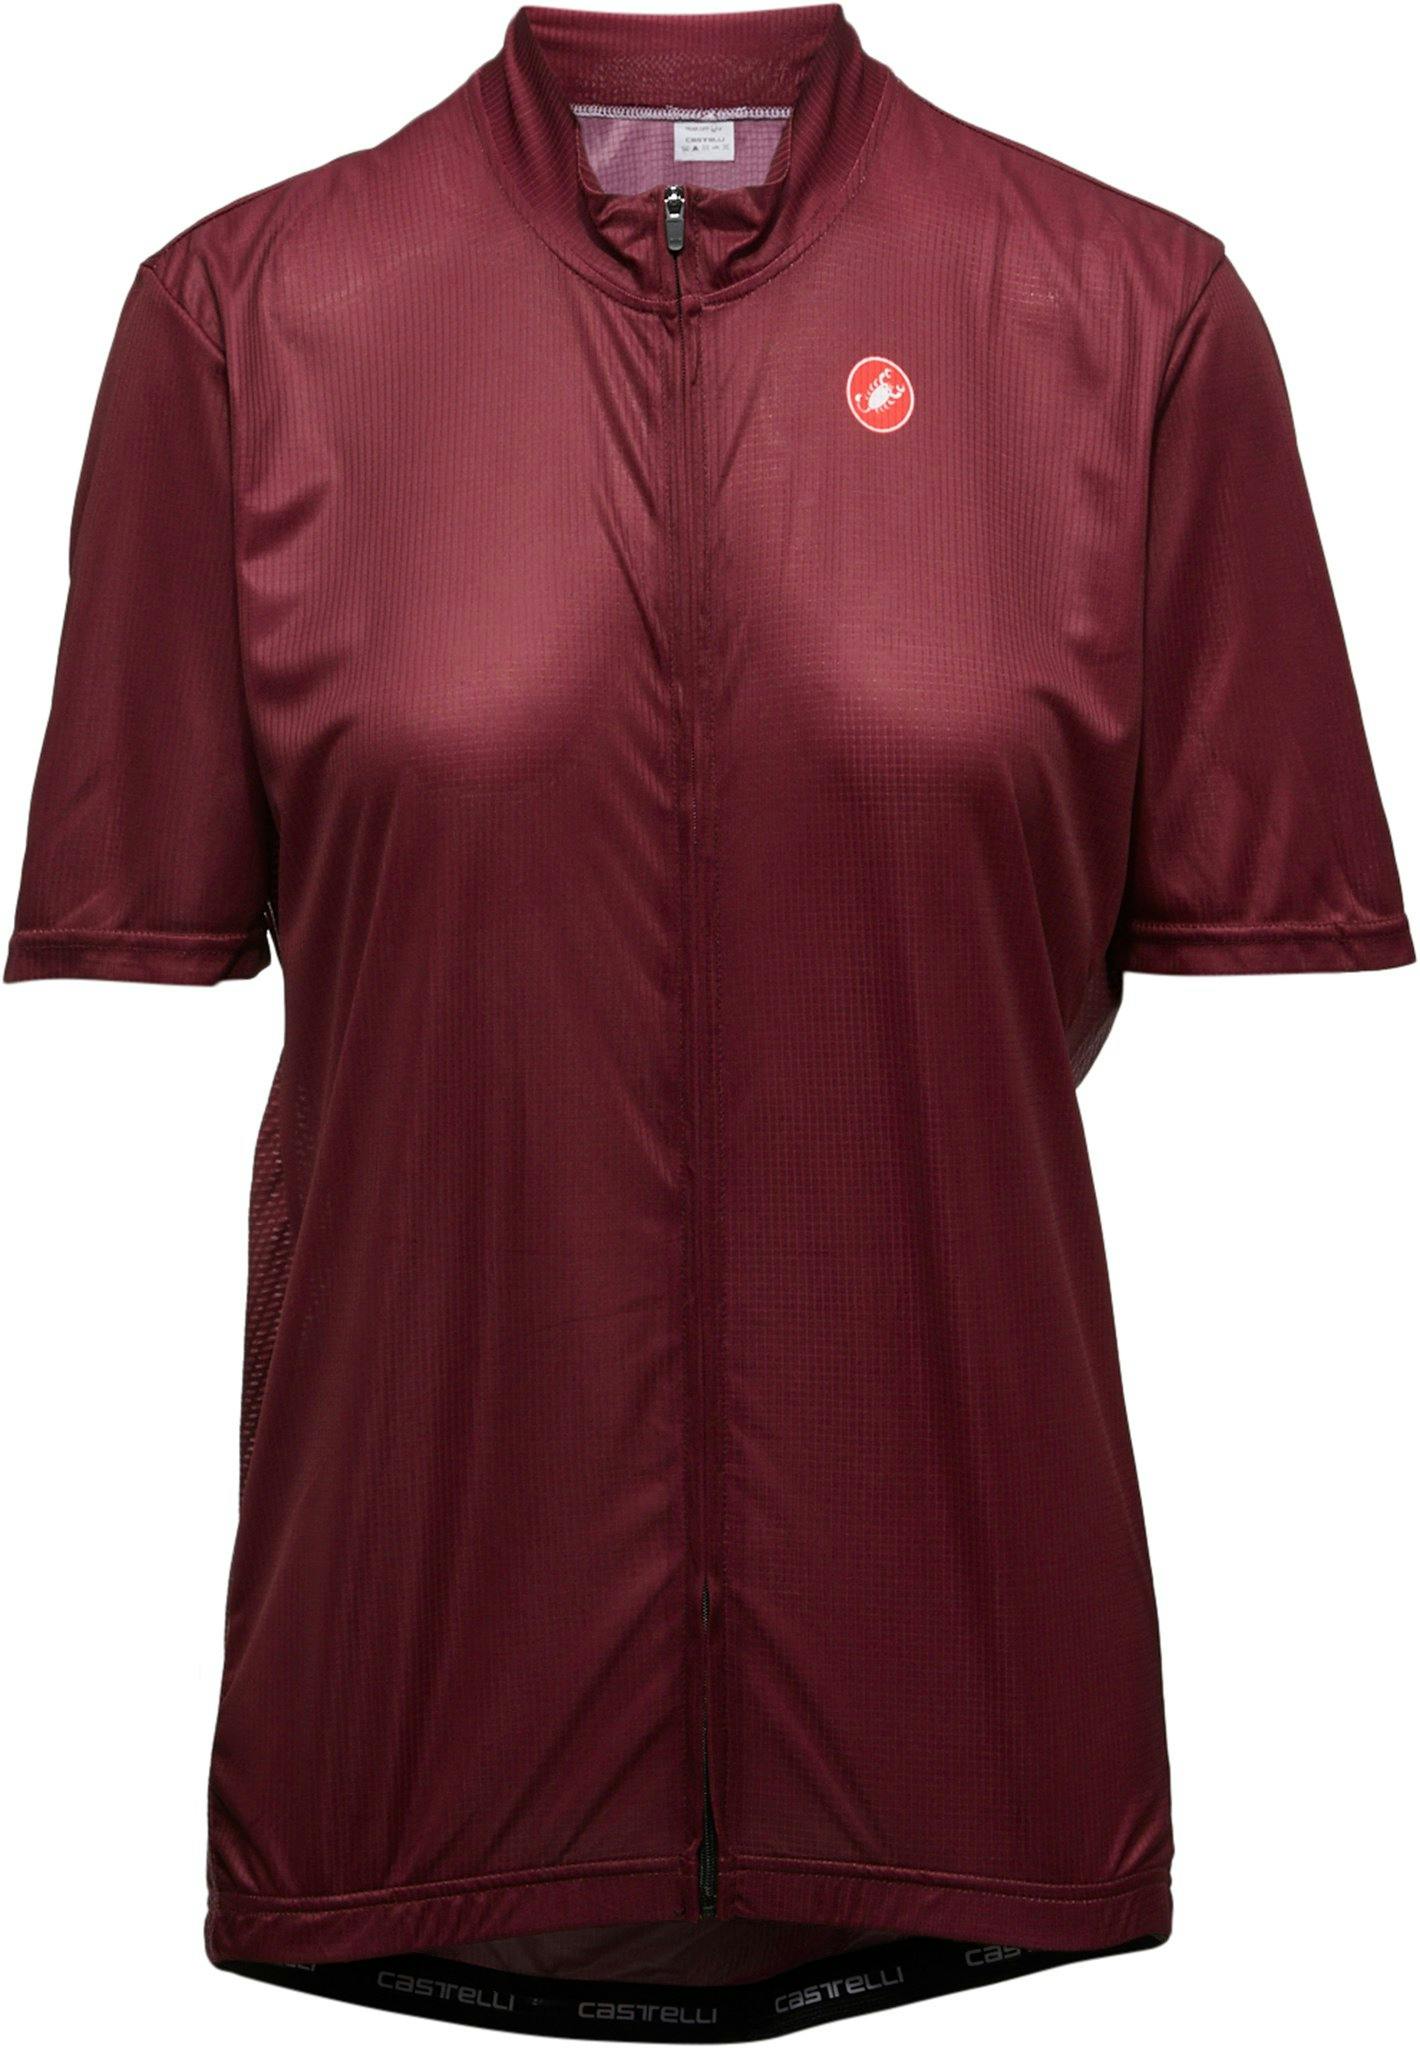 Product image for Inizio Jersey - Women's